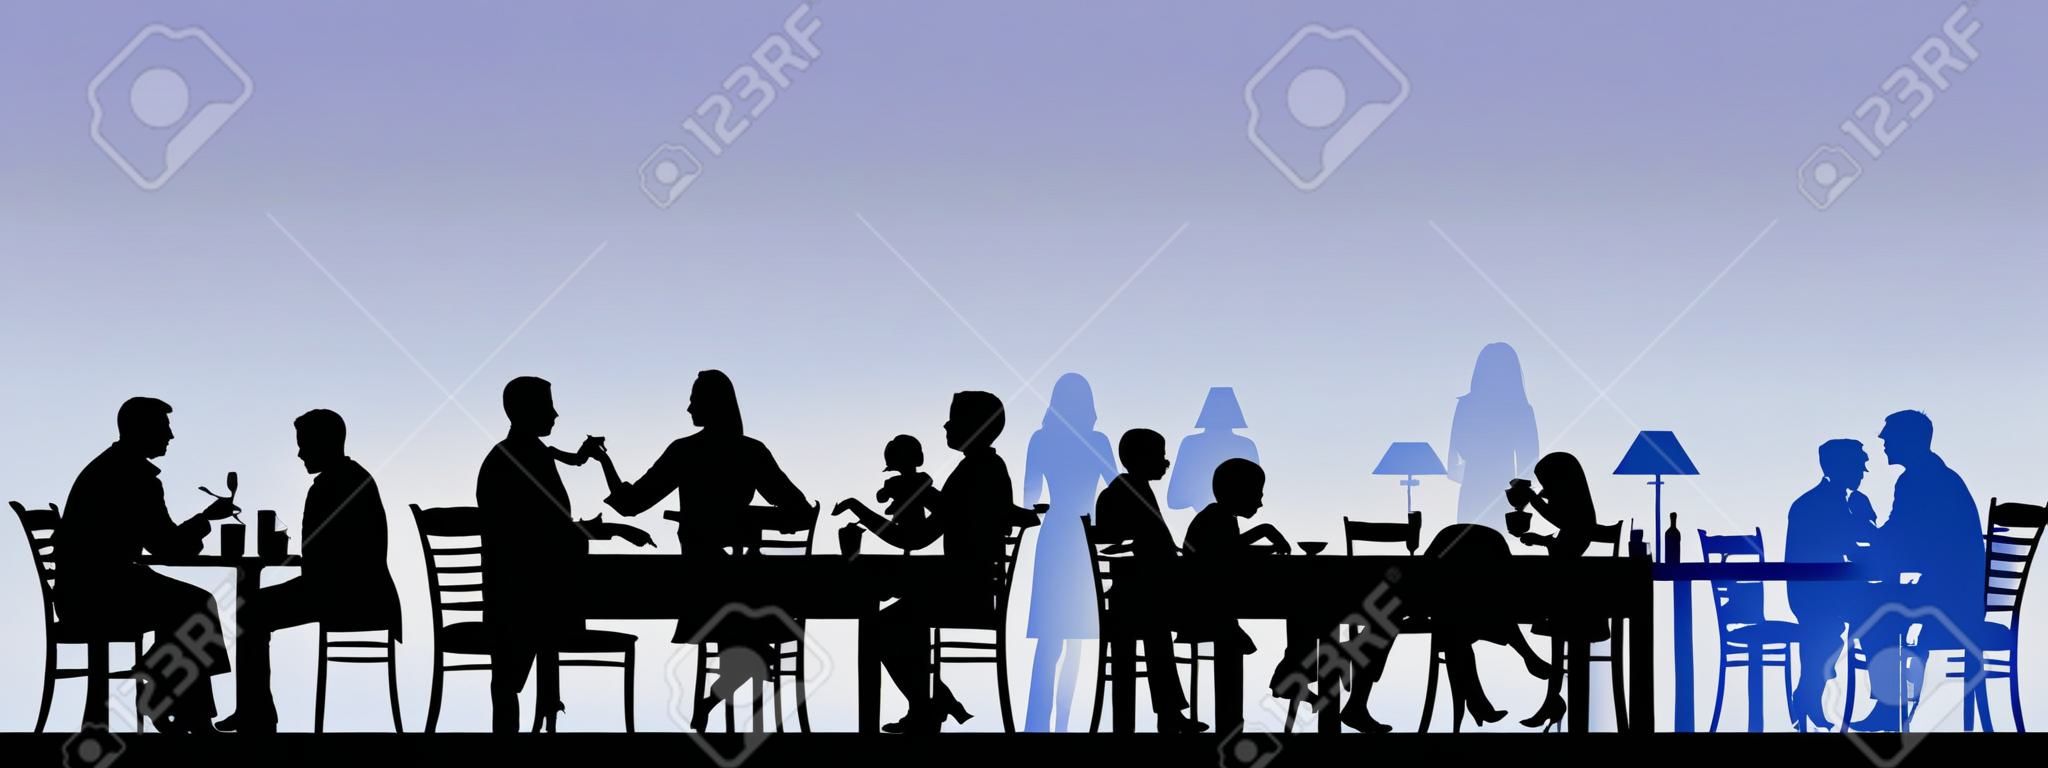 Silhouette of people eating in a restaurant with all figures as separate objects layered